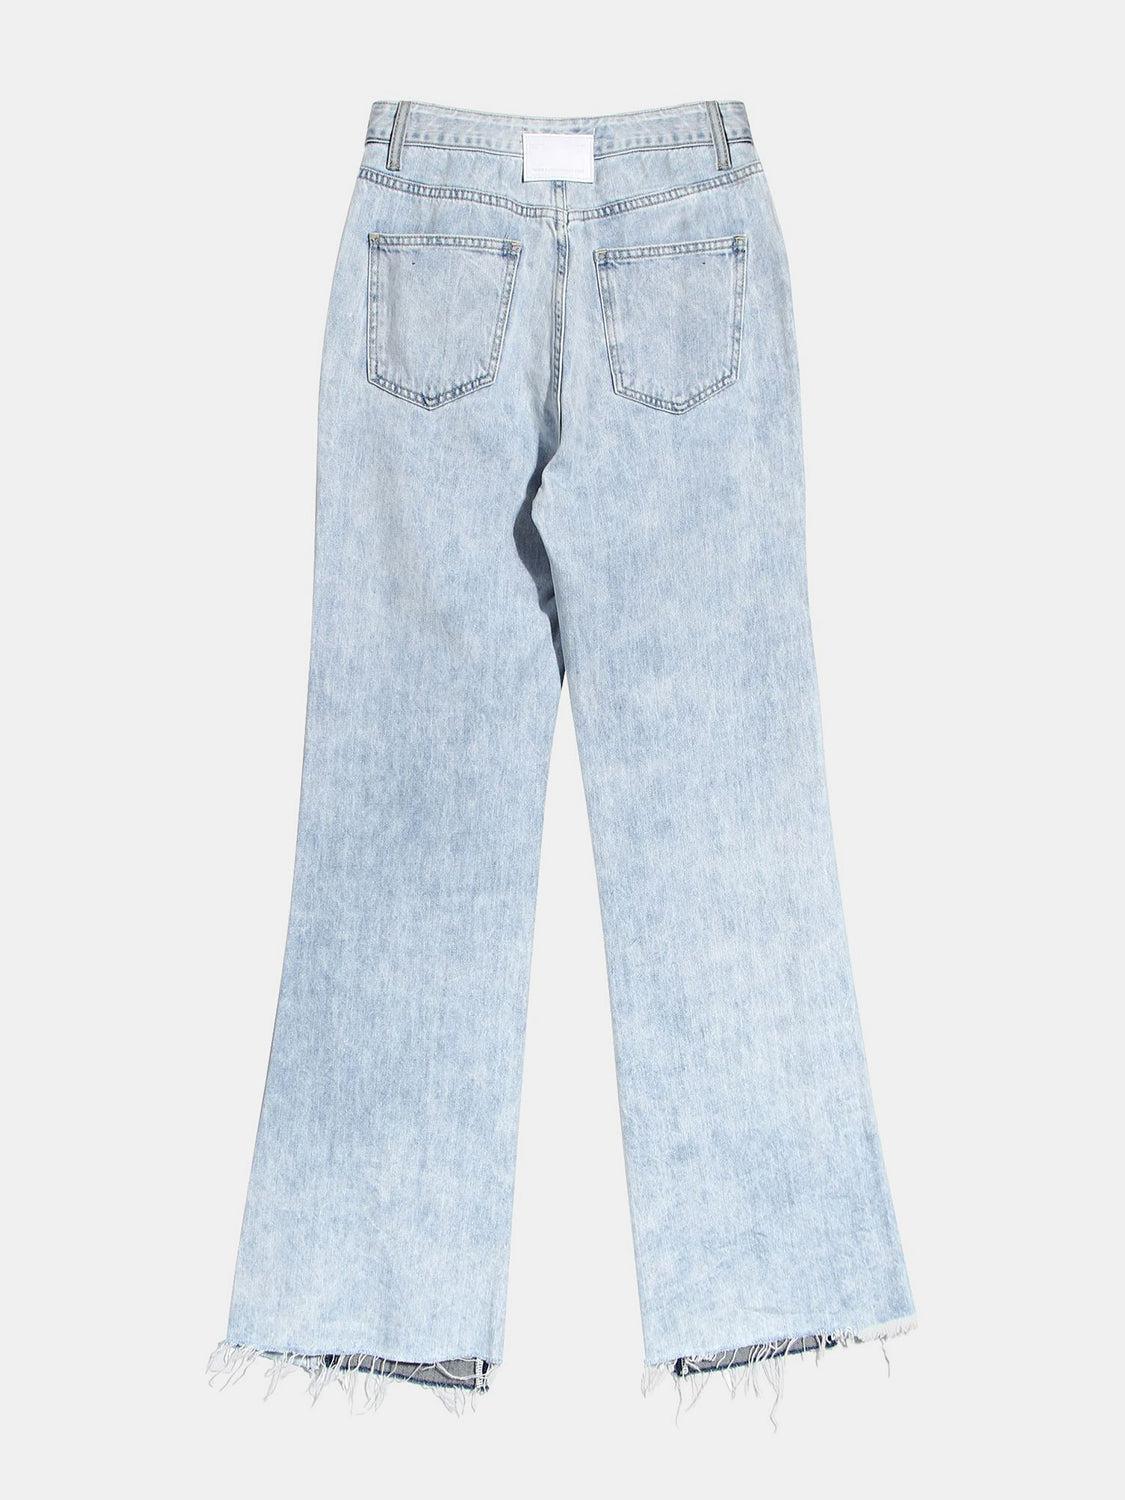 a pair of light blue jeans on a white background